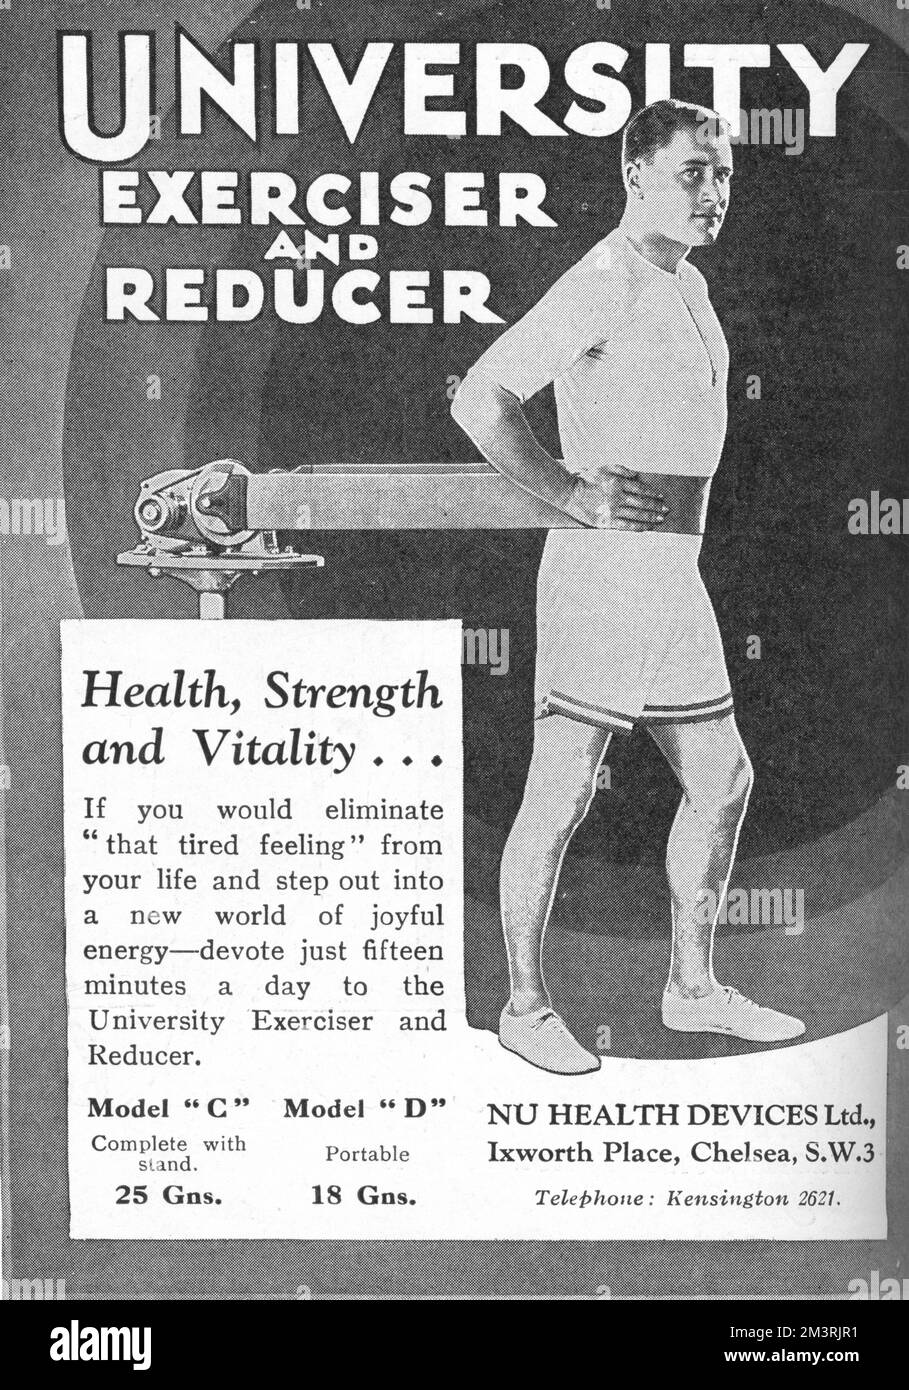 Advertisement for the University Exerciser and Reducer to 'eliminate that tired feeling from your life and step out into a new world of joyful energy.'  Available from Nu Health Devices Ltd of Ixworth Place, Chelsea.  1930 Stock Photo